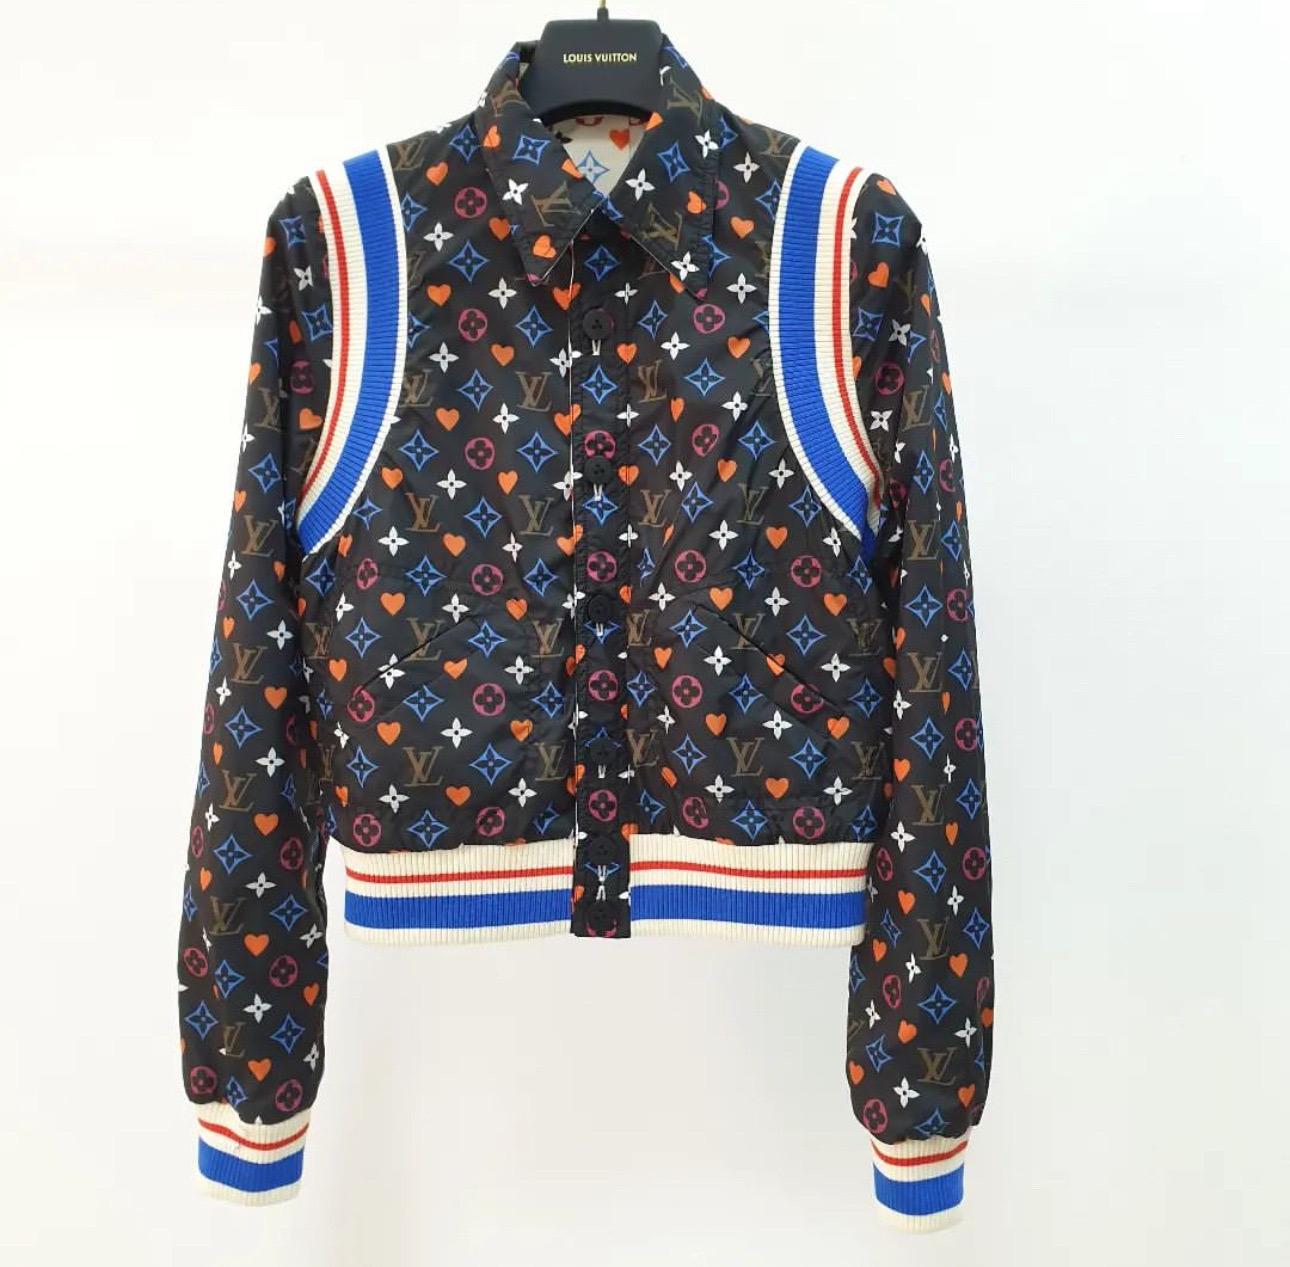     Louis Vuitton Monogram Game On Bomber Jacket
    From the 2021 Collection by Nicolas Ghesquière
    Black
    Reversible
    Printed
    Stand Collar
    Slit Pockets & Button Closure

Sz.36

Very good condition.